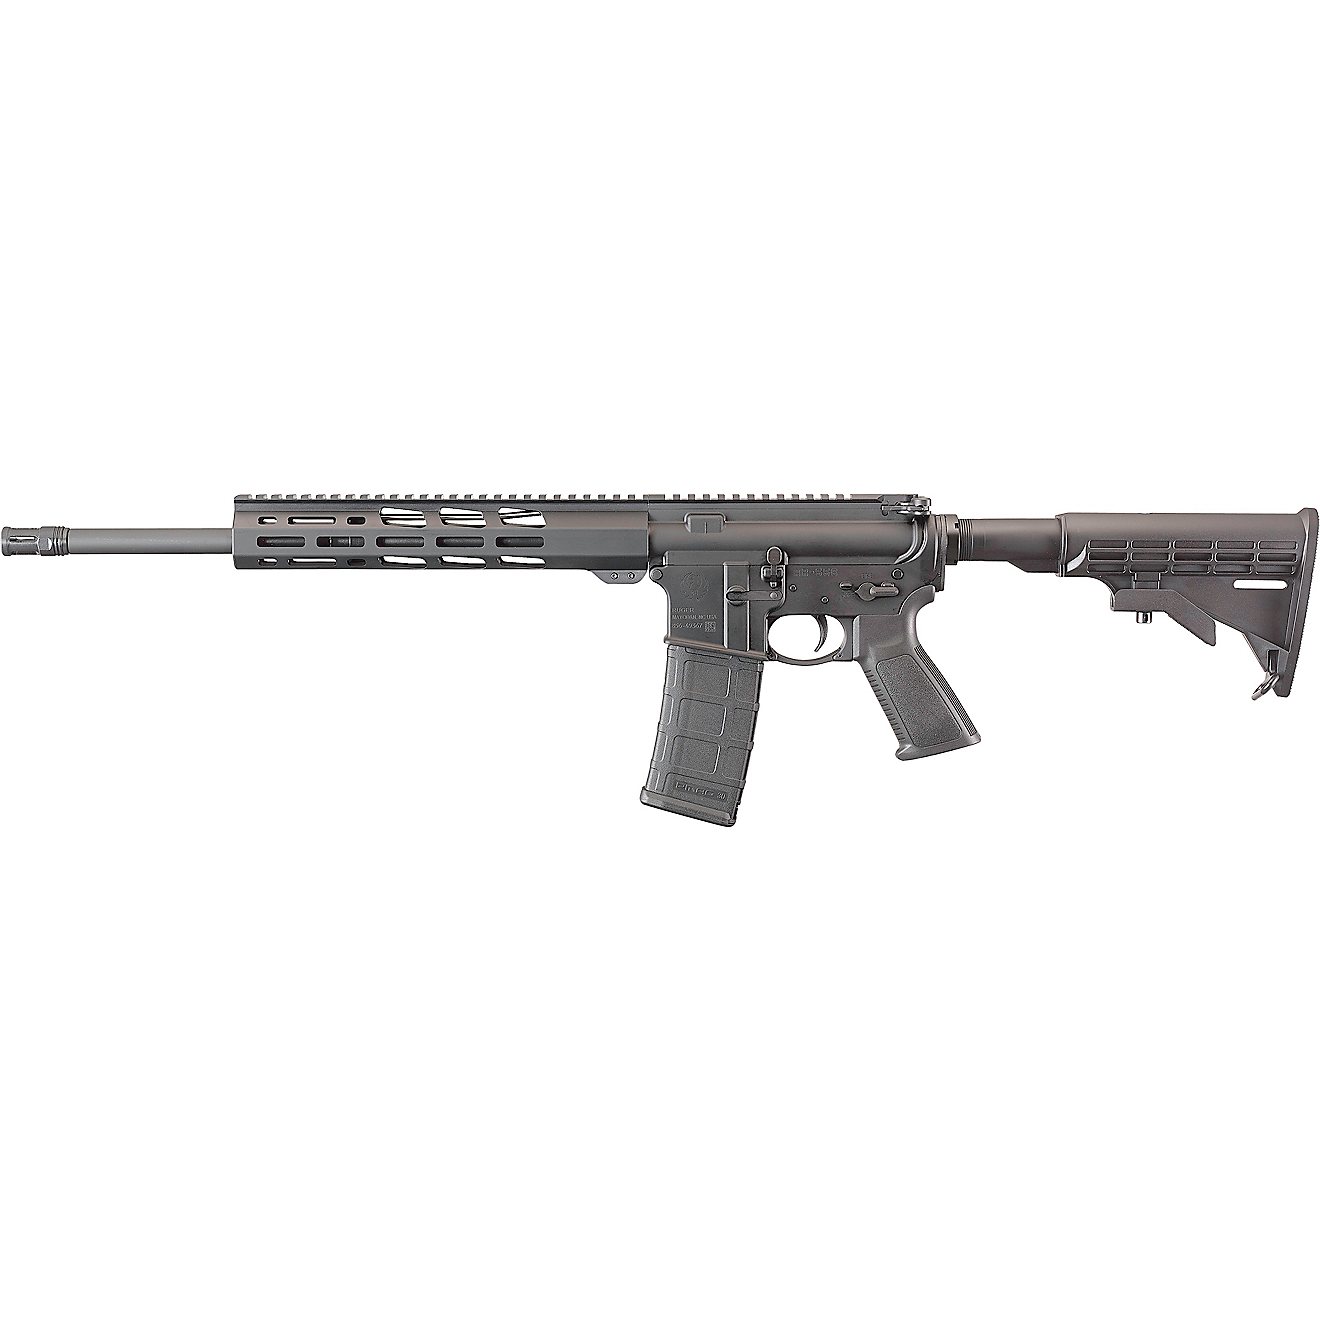 Ruger AR-556 .233 Remington/5.56 NATO Semiautomatic Rifle                                                                        - view number 2